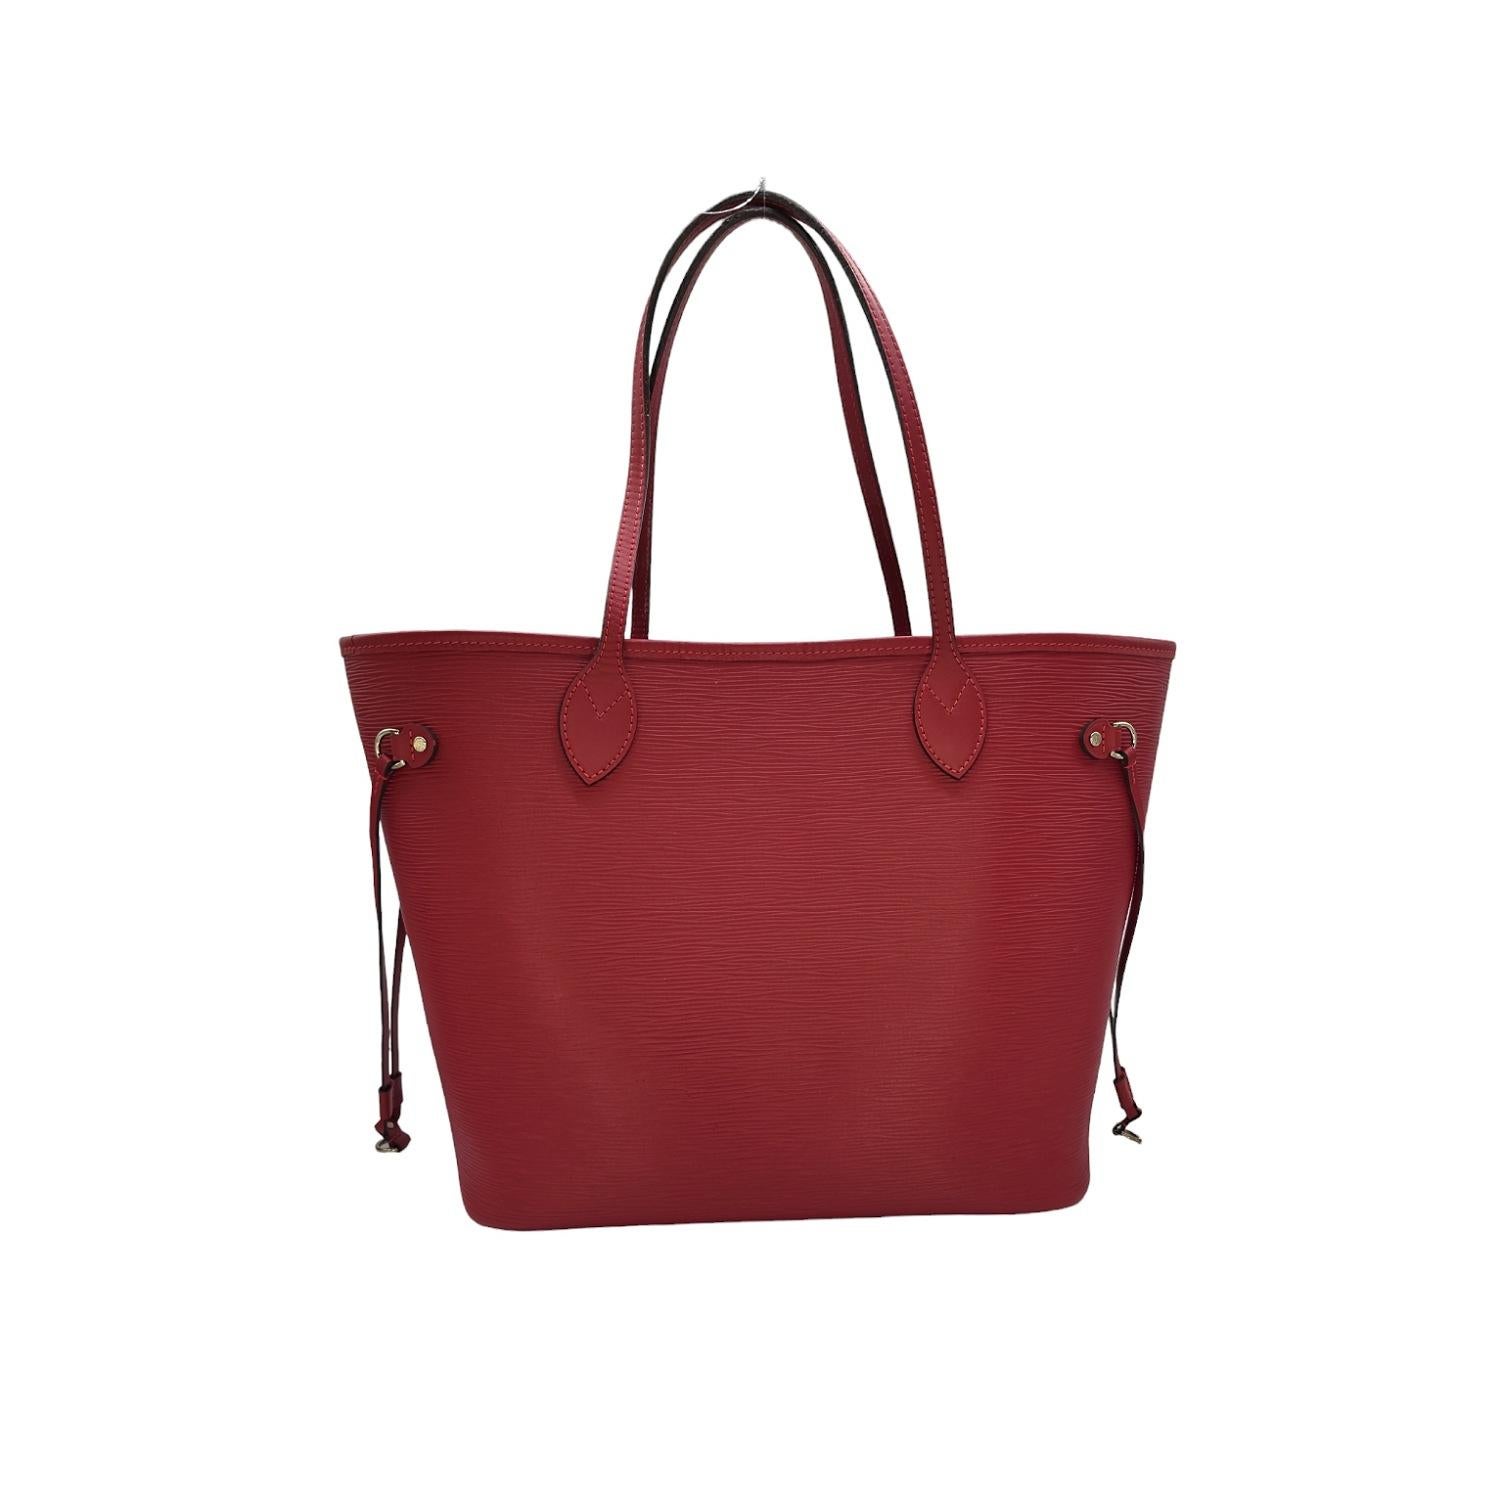 Indulge in luxury with the Louis Vuitton Neverfull MM Tote. Crafted from vibrant red Epi leather, this tote is both stylish and functional. The smooth leather strap handles, polished silver hardware, and microfiber interior add to the elegance.